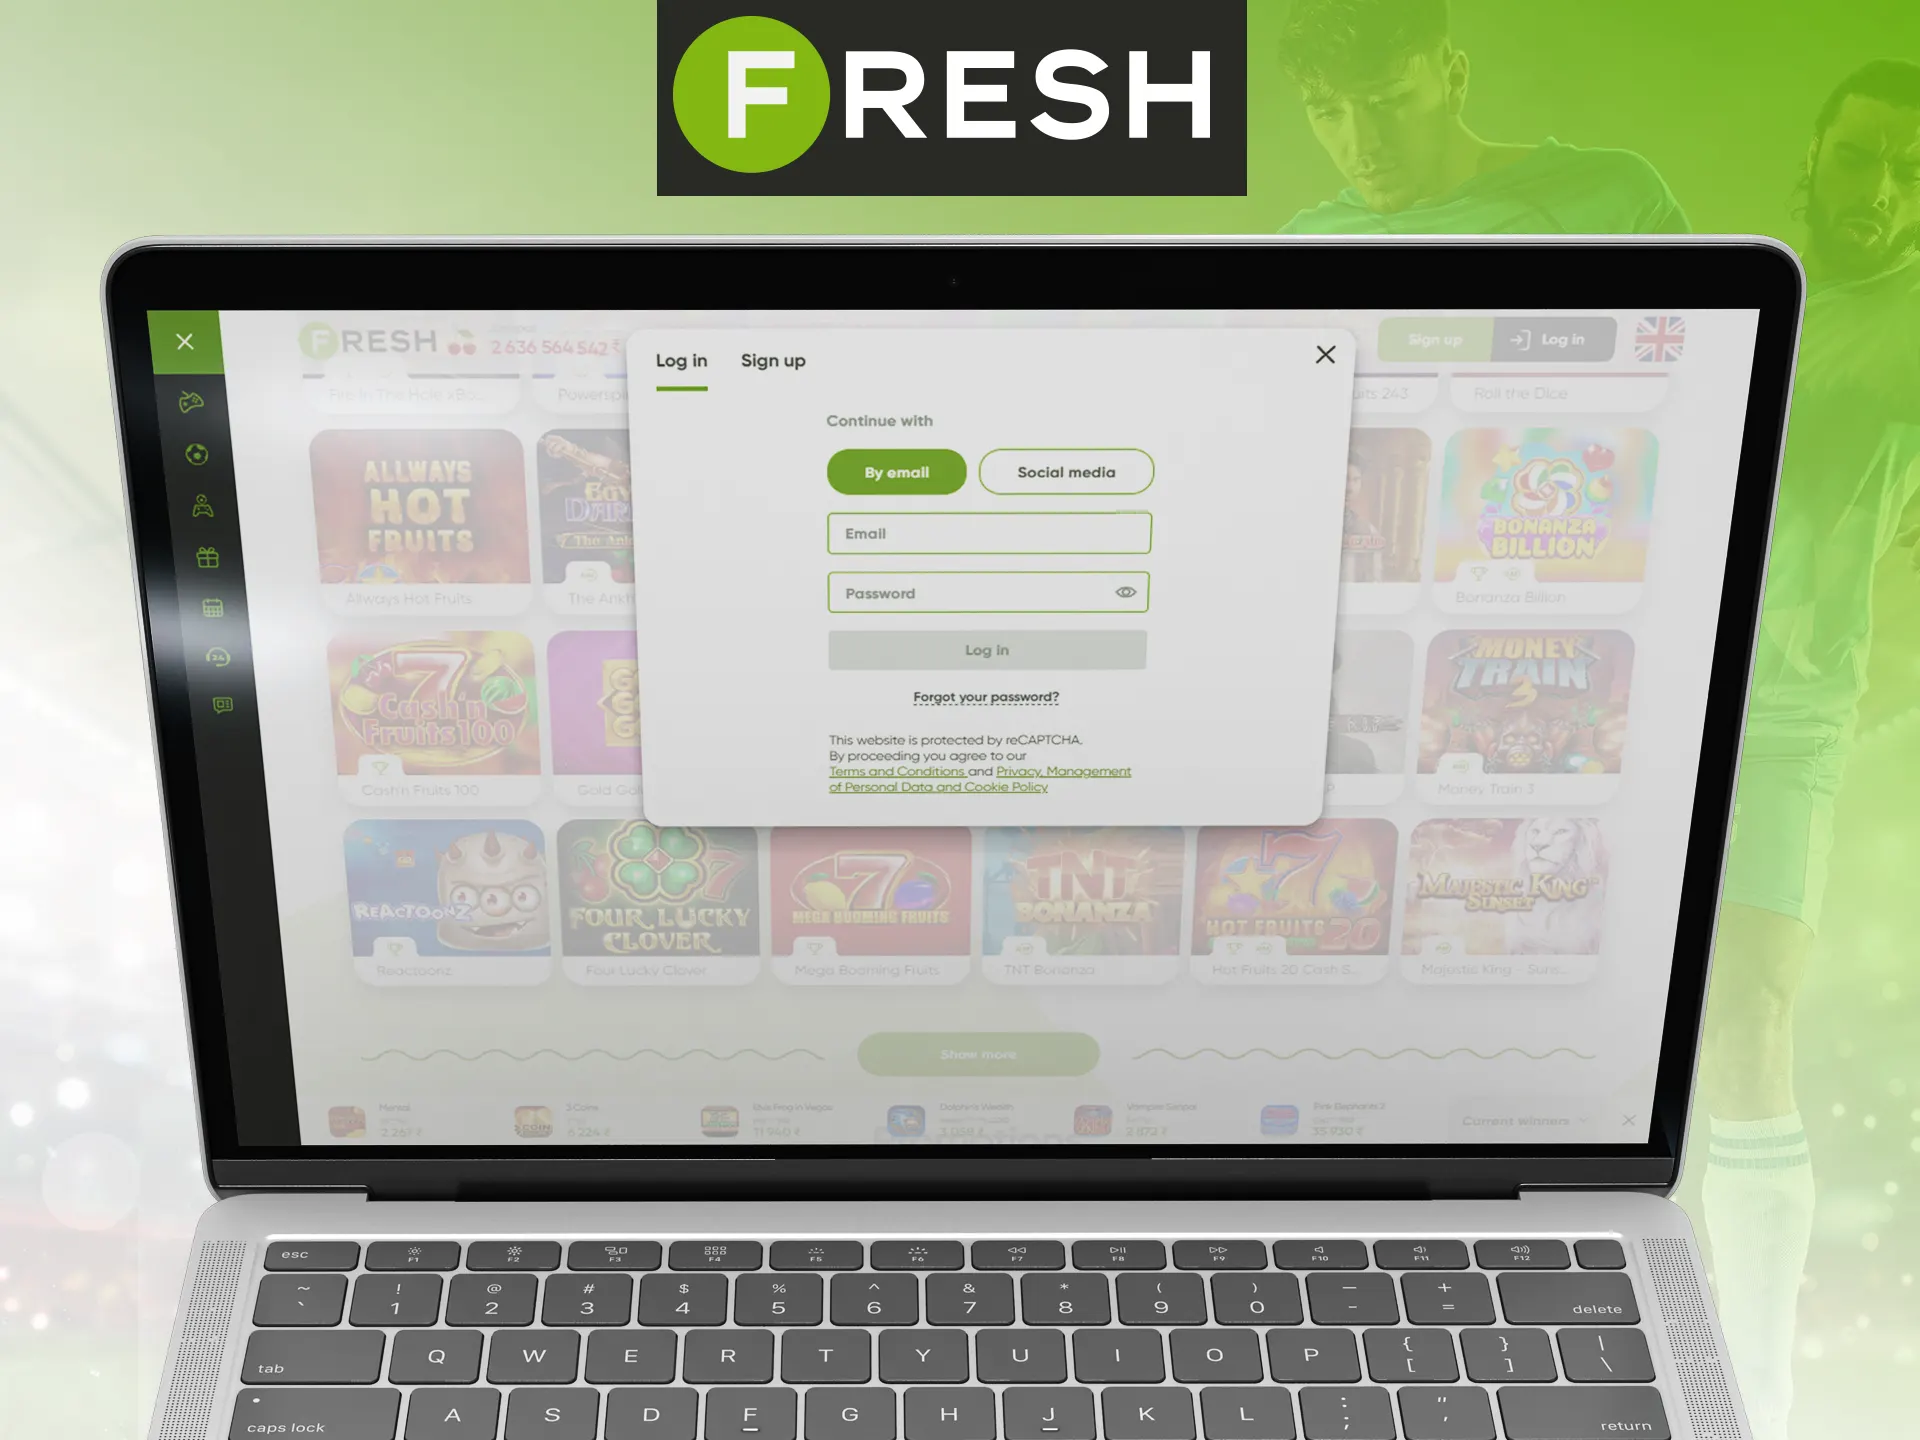 Use your Fresh Casino account for logging in.